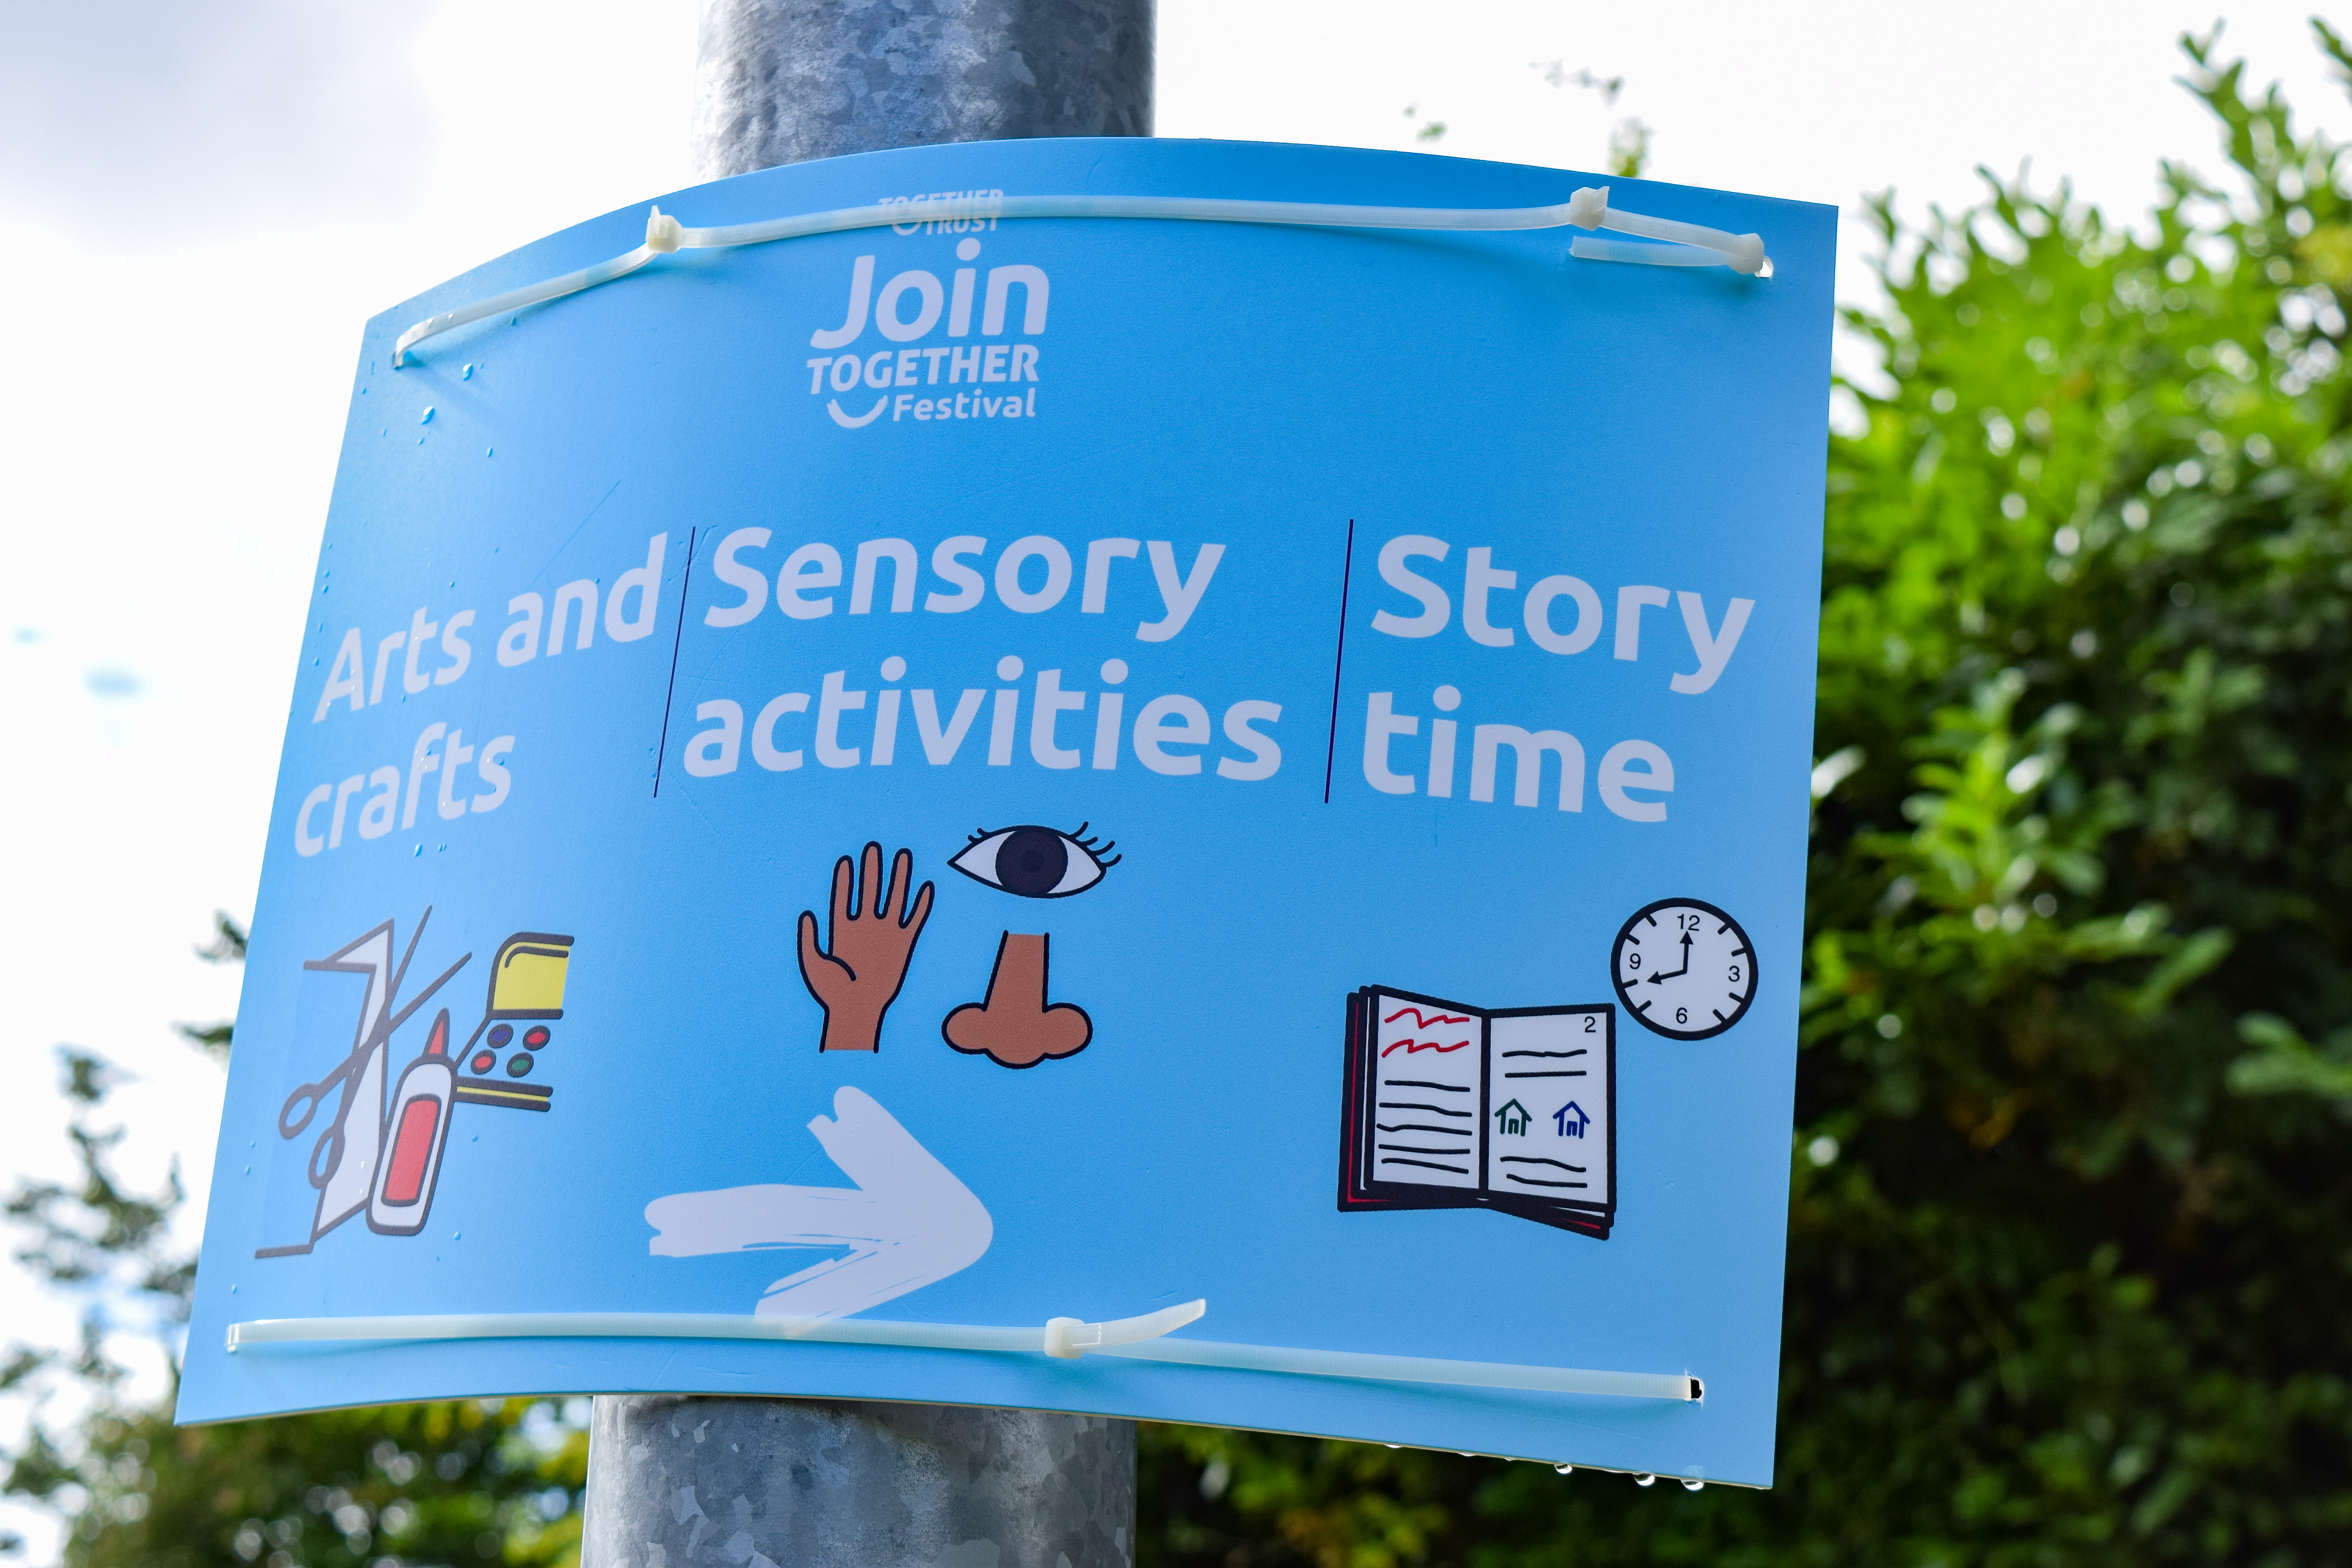 A sign with light blue background and graphic illustrations that read: “Arts and crafts”, “Sensory activities” and “Story time”.